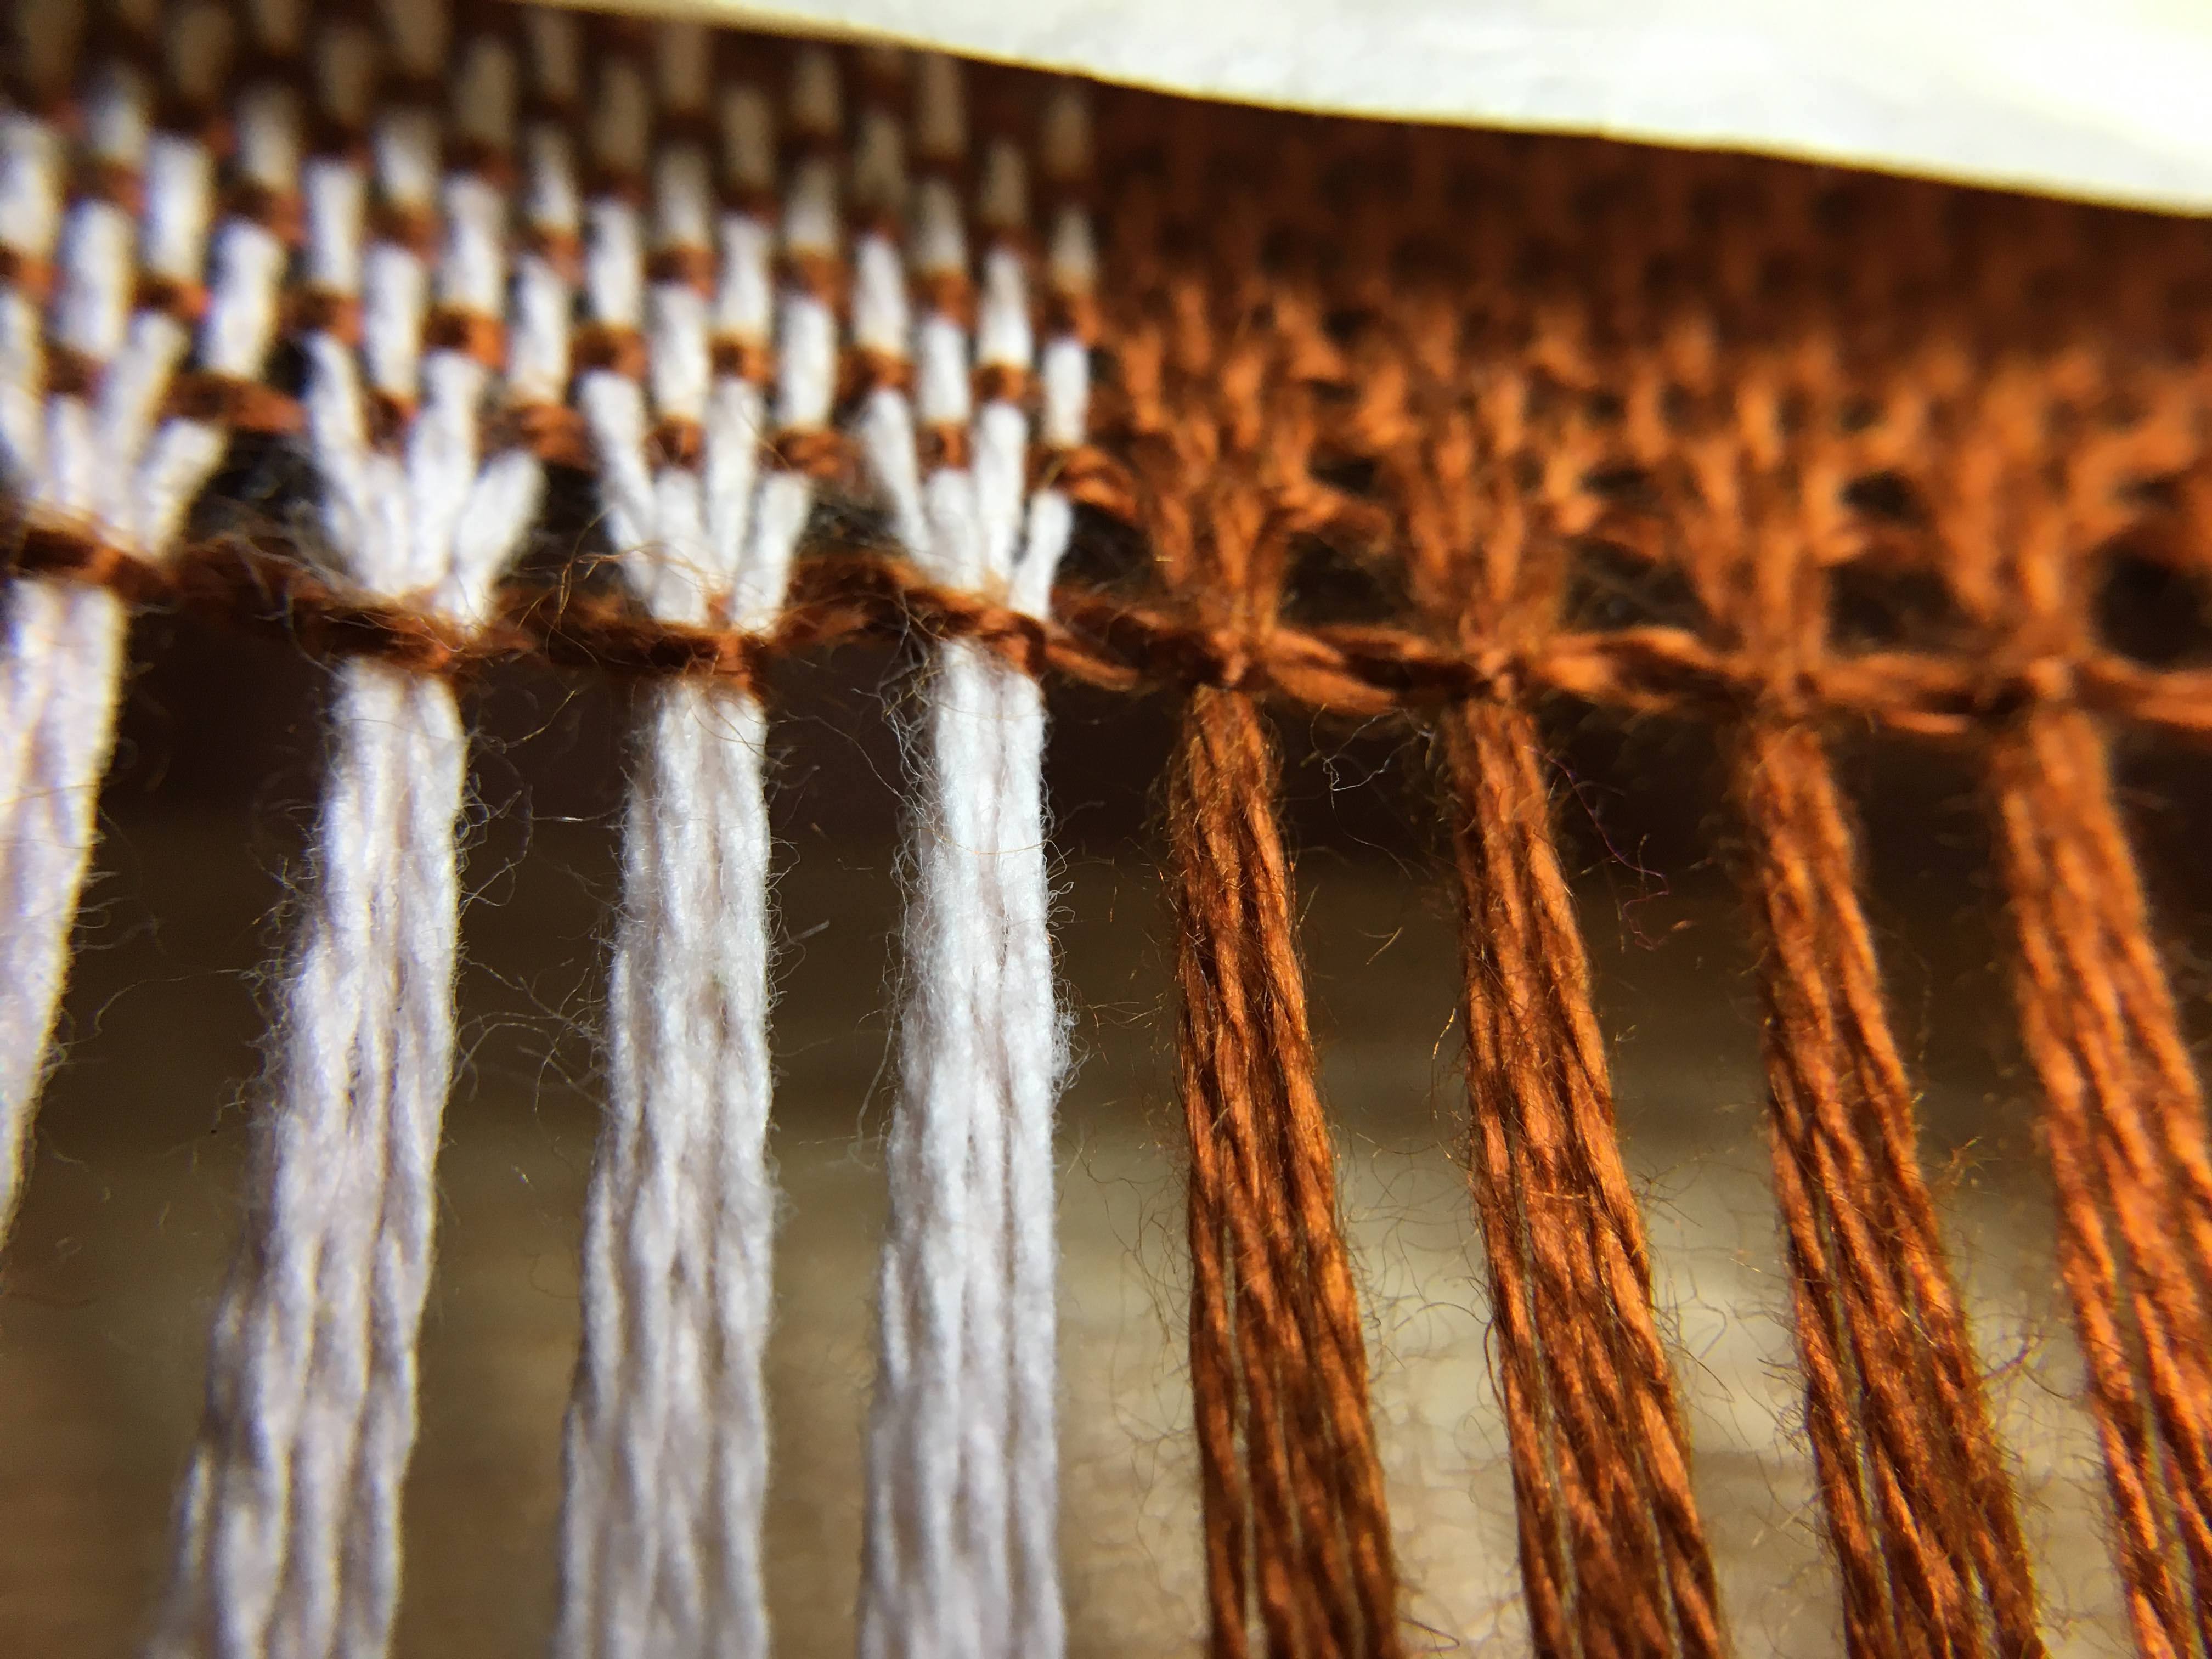 view of finished binding row, looks a bit separated by first warp row, might be fixed by selecting yarns about 3-4 rows up in stead of one. 